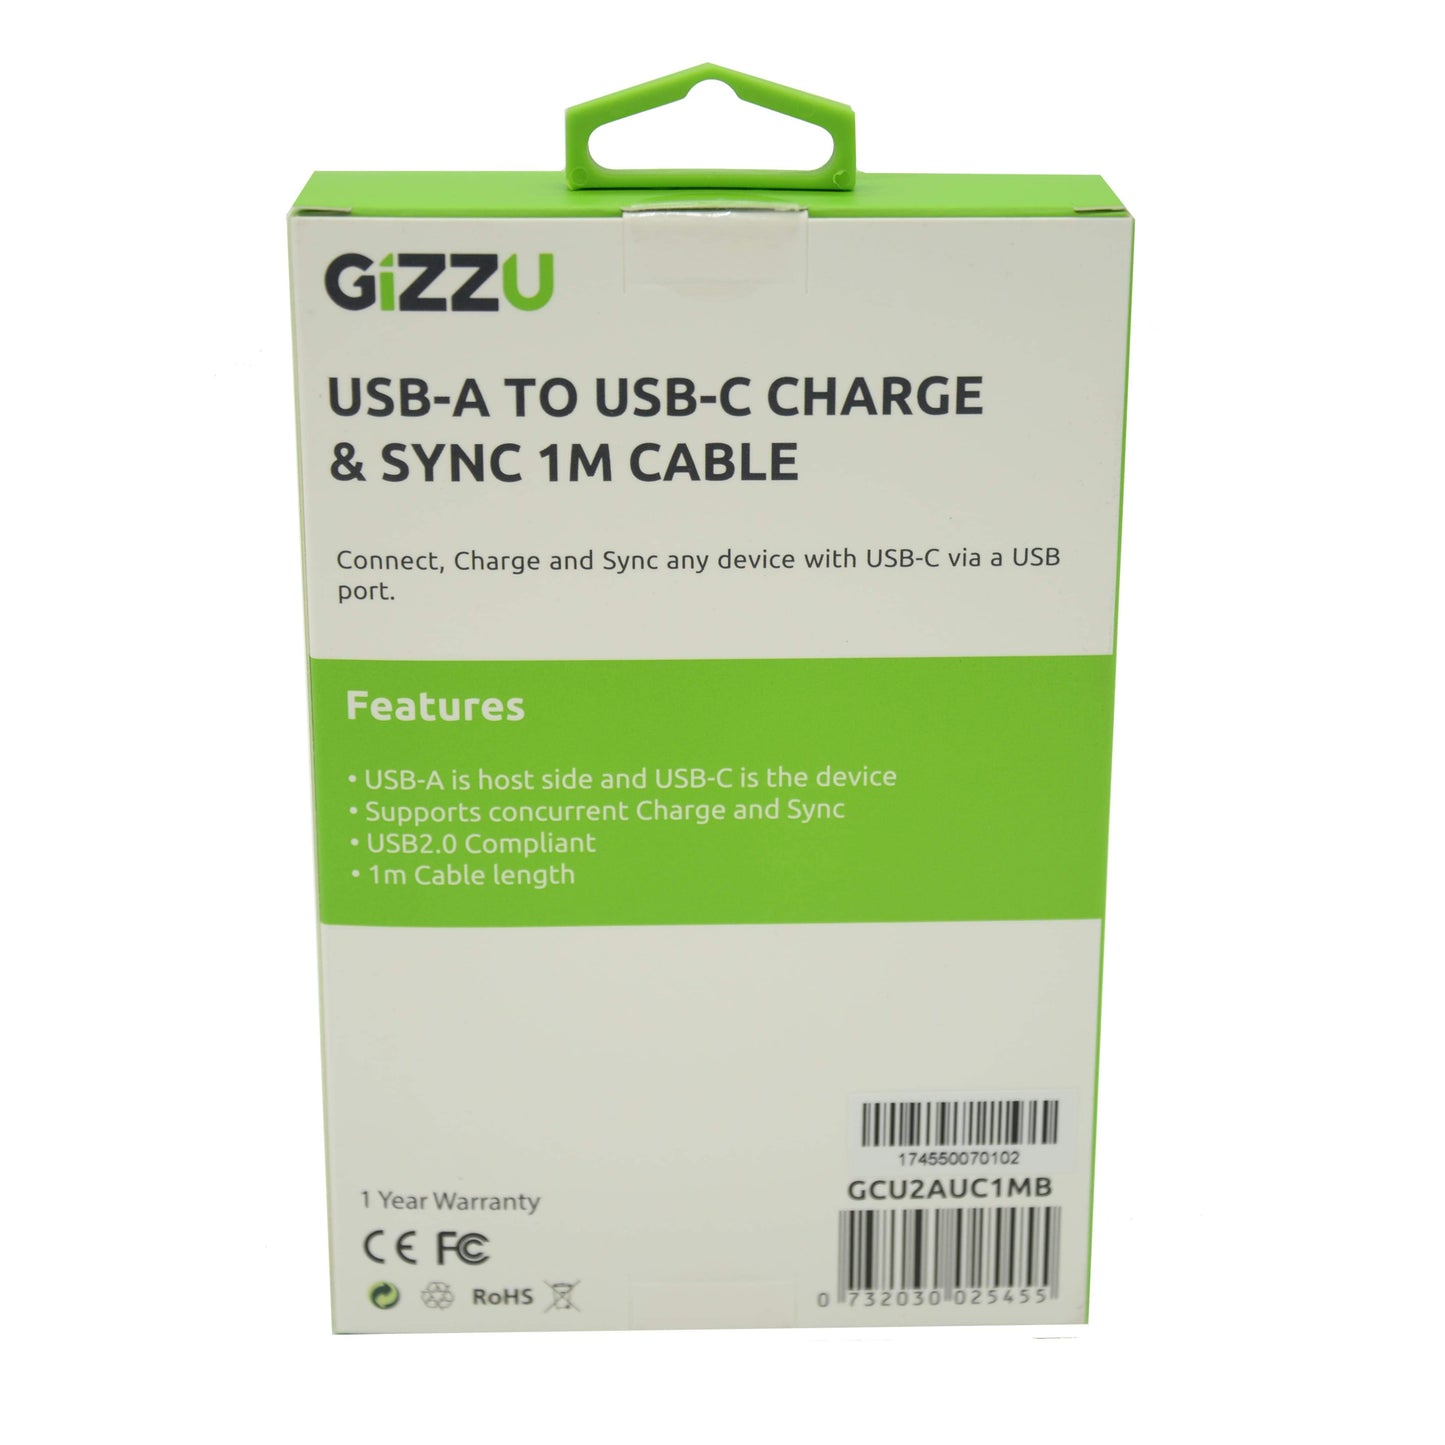 GIZZU USB2.0 A to USB-C 1m Cable - Black